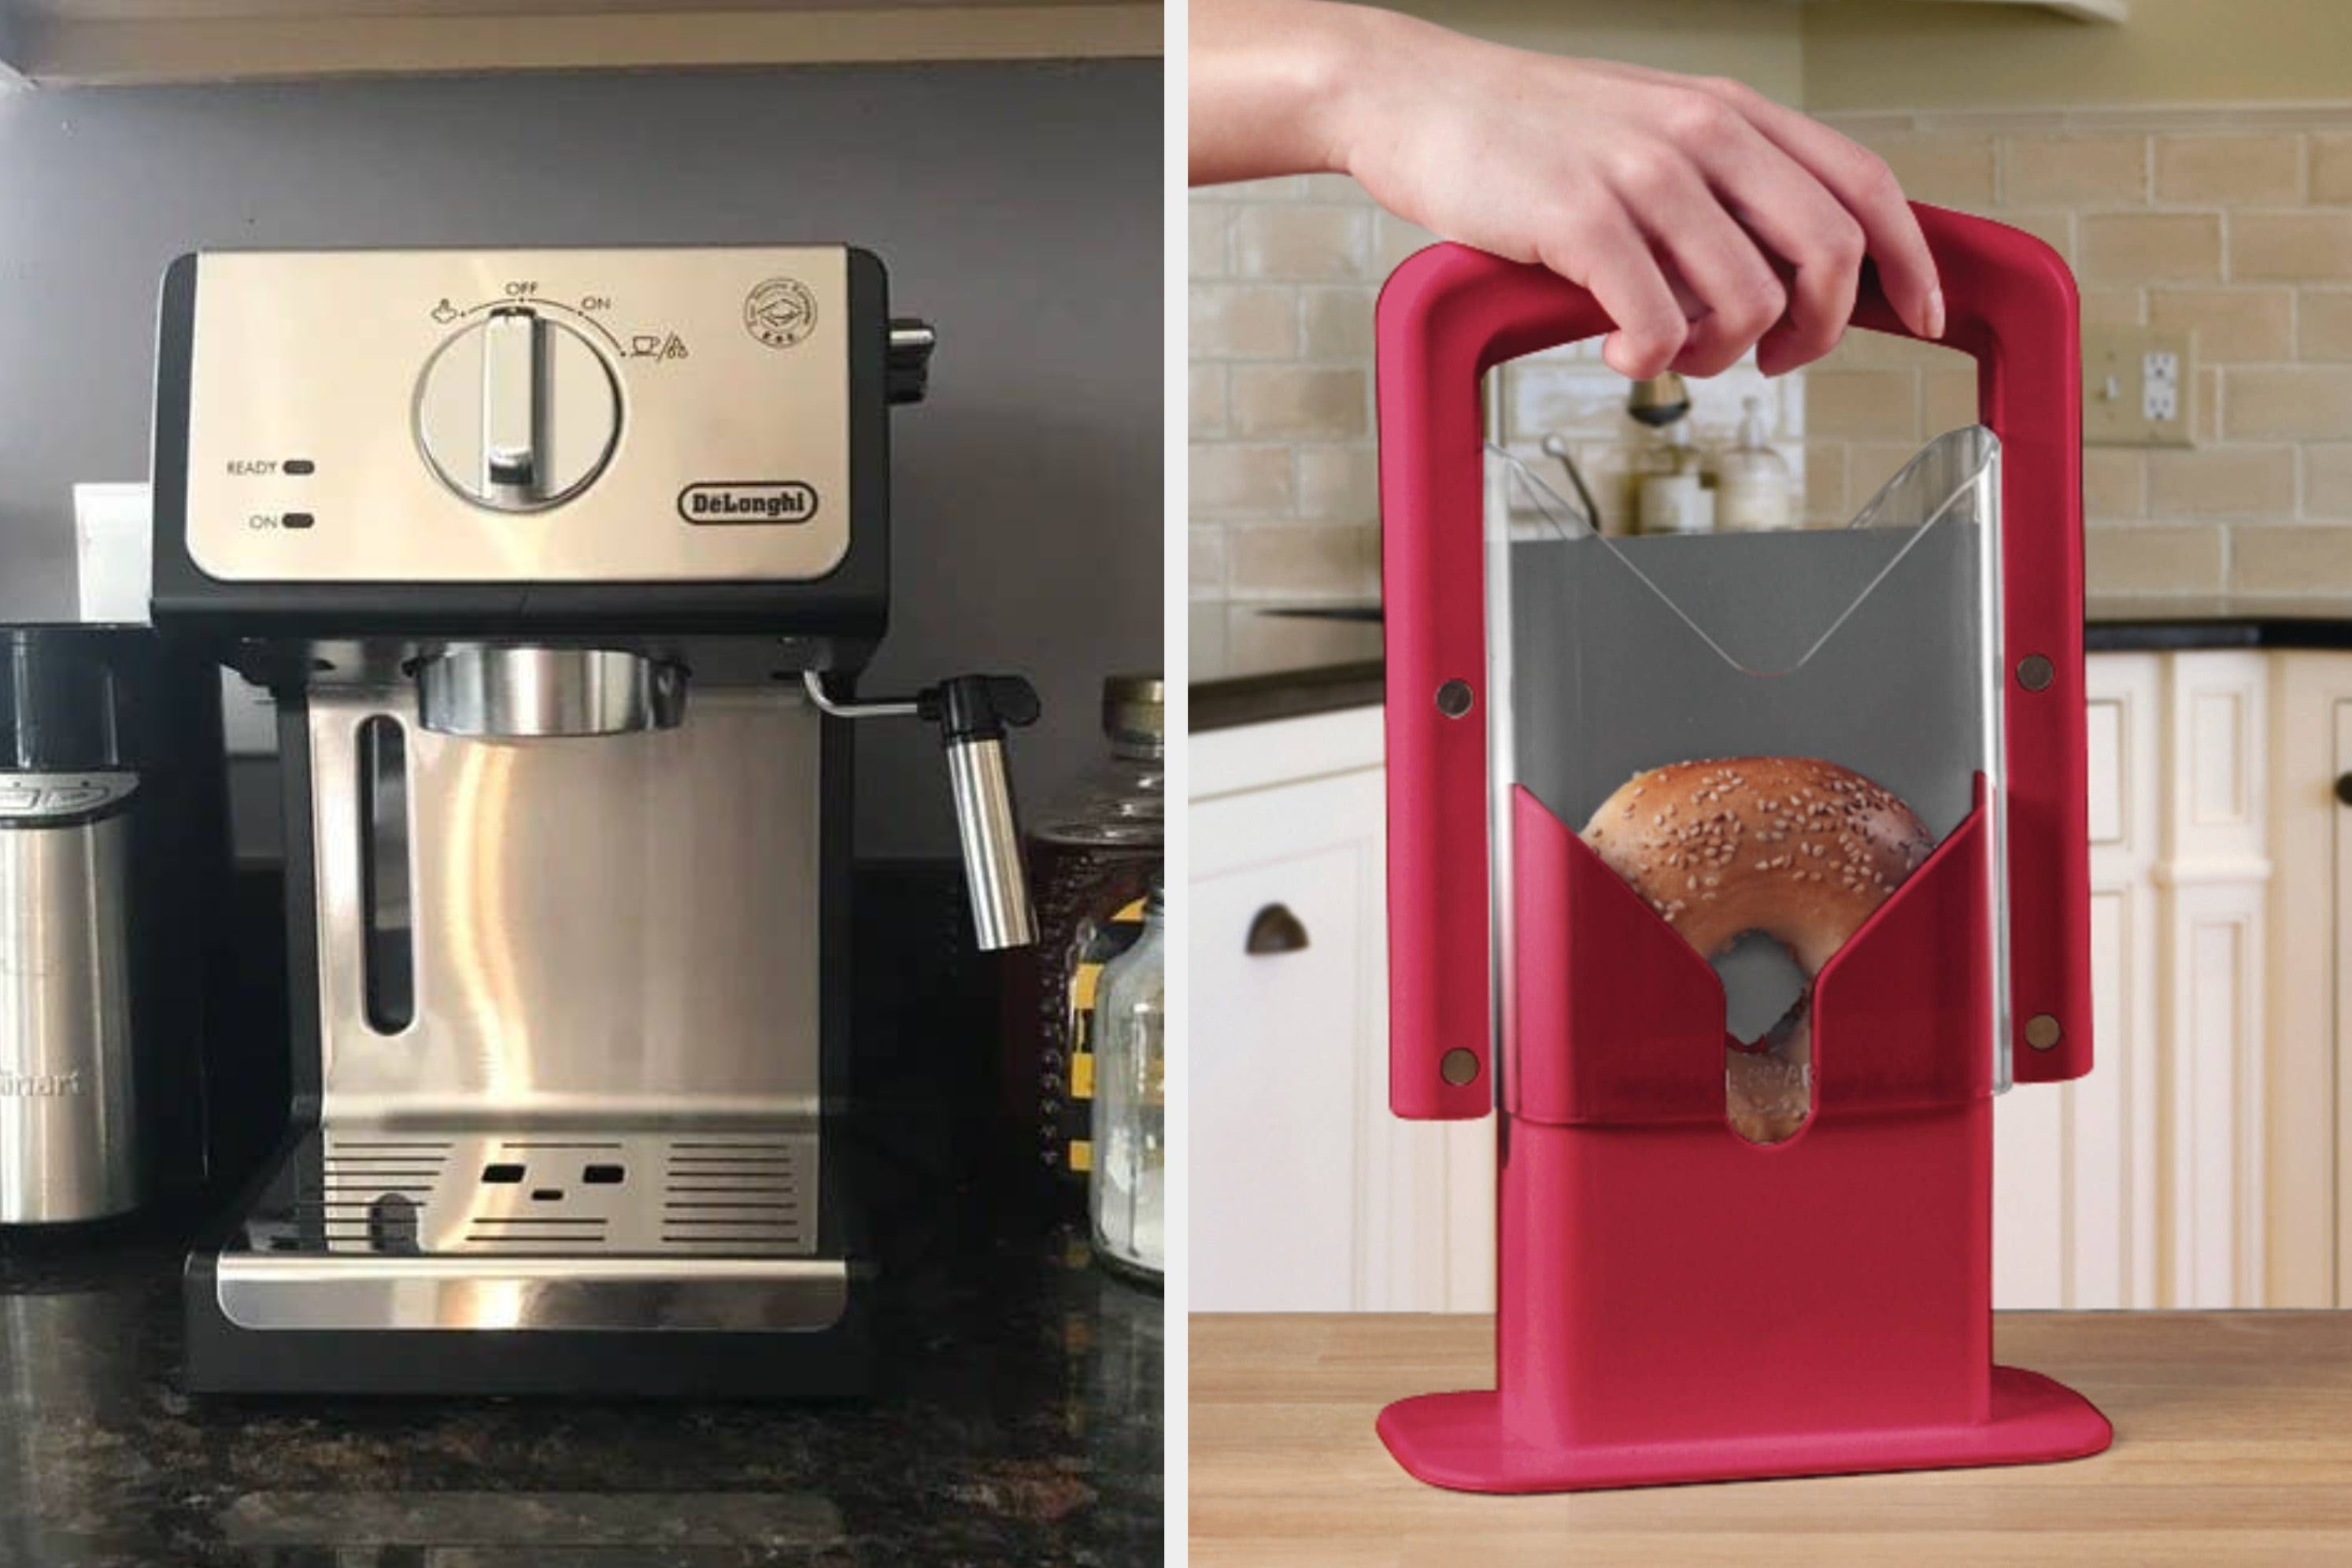 30 Wayfair Kitchen Products Your Friends Will Want To Buy Right After You Do